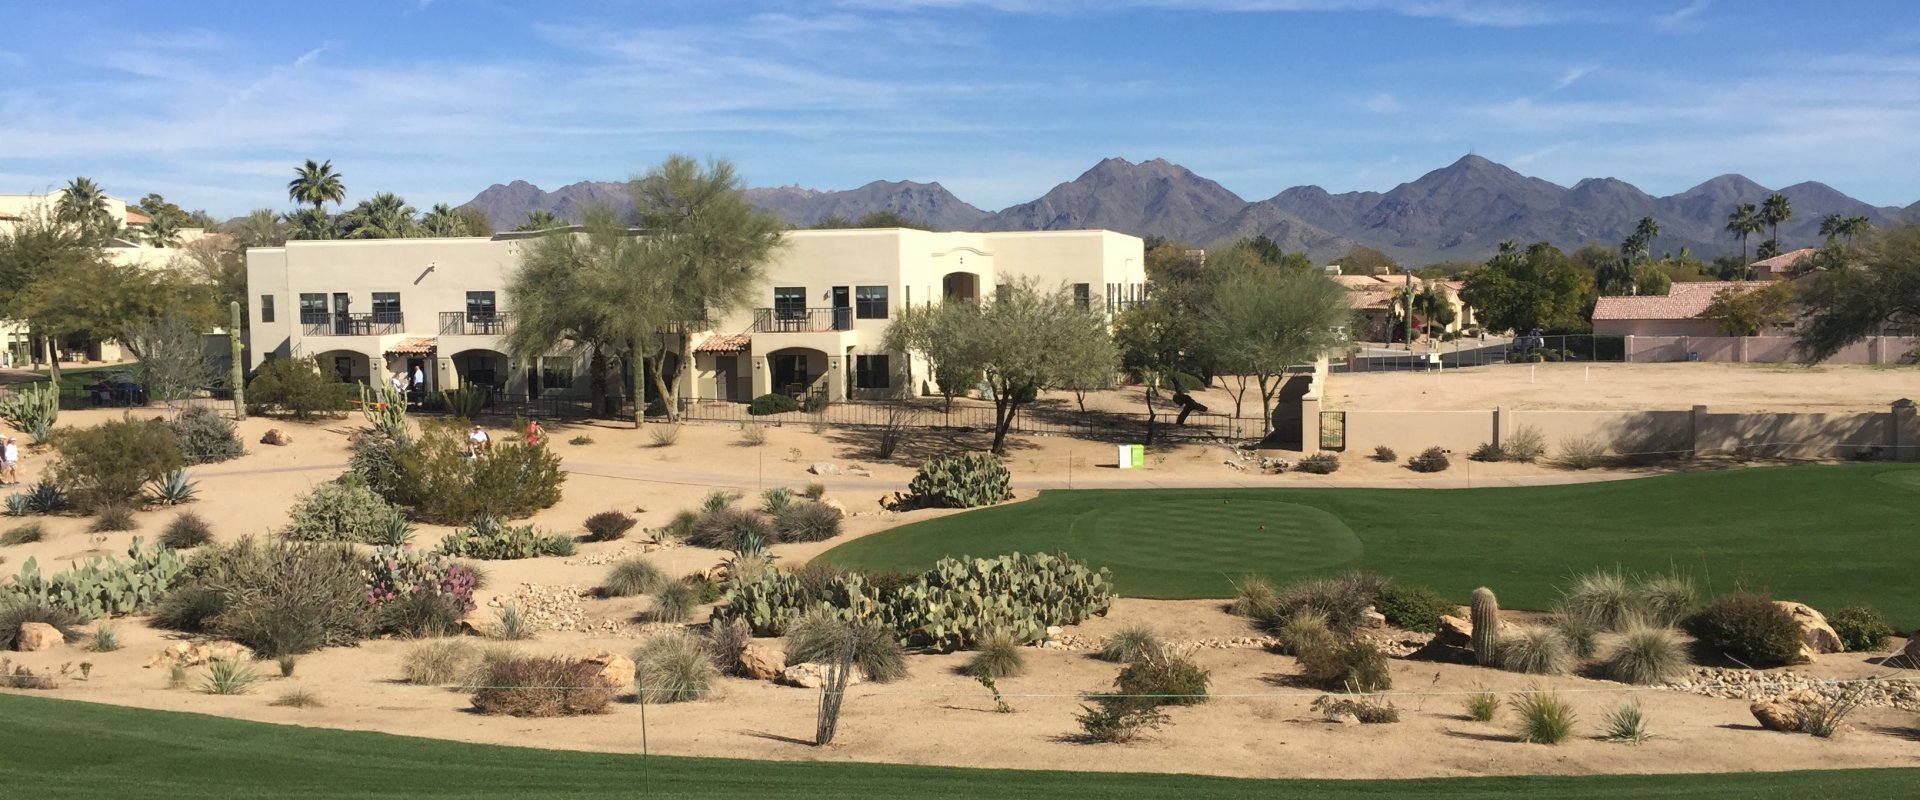 sell-my-home-for-cash-phoenix-golf